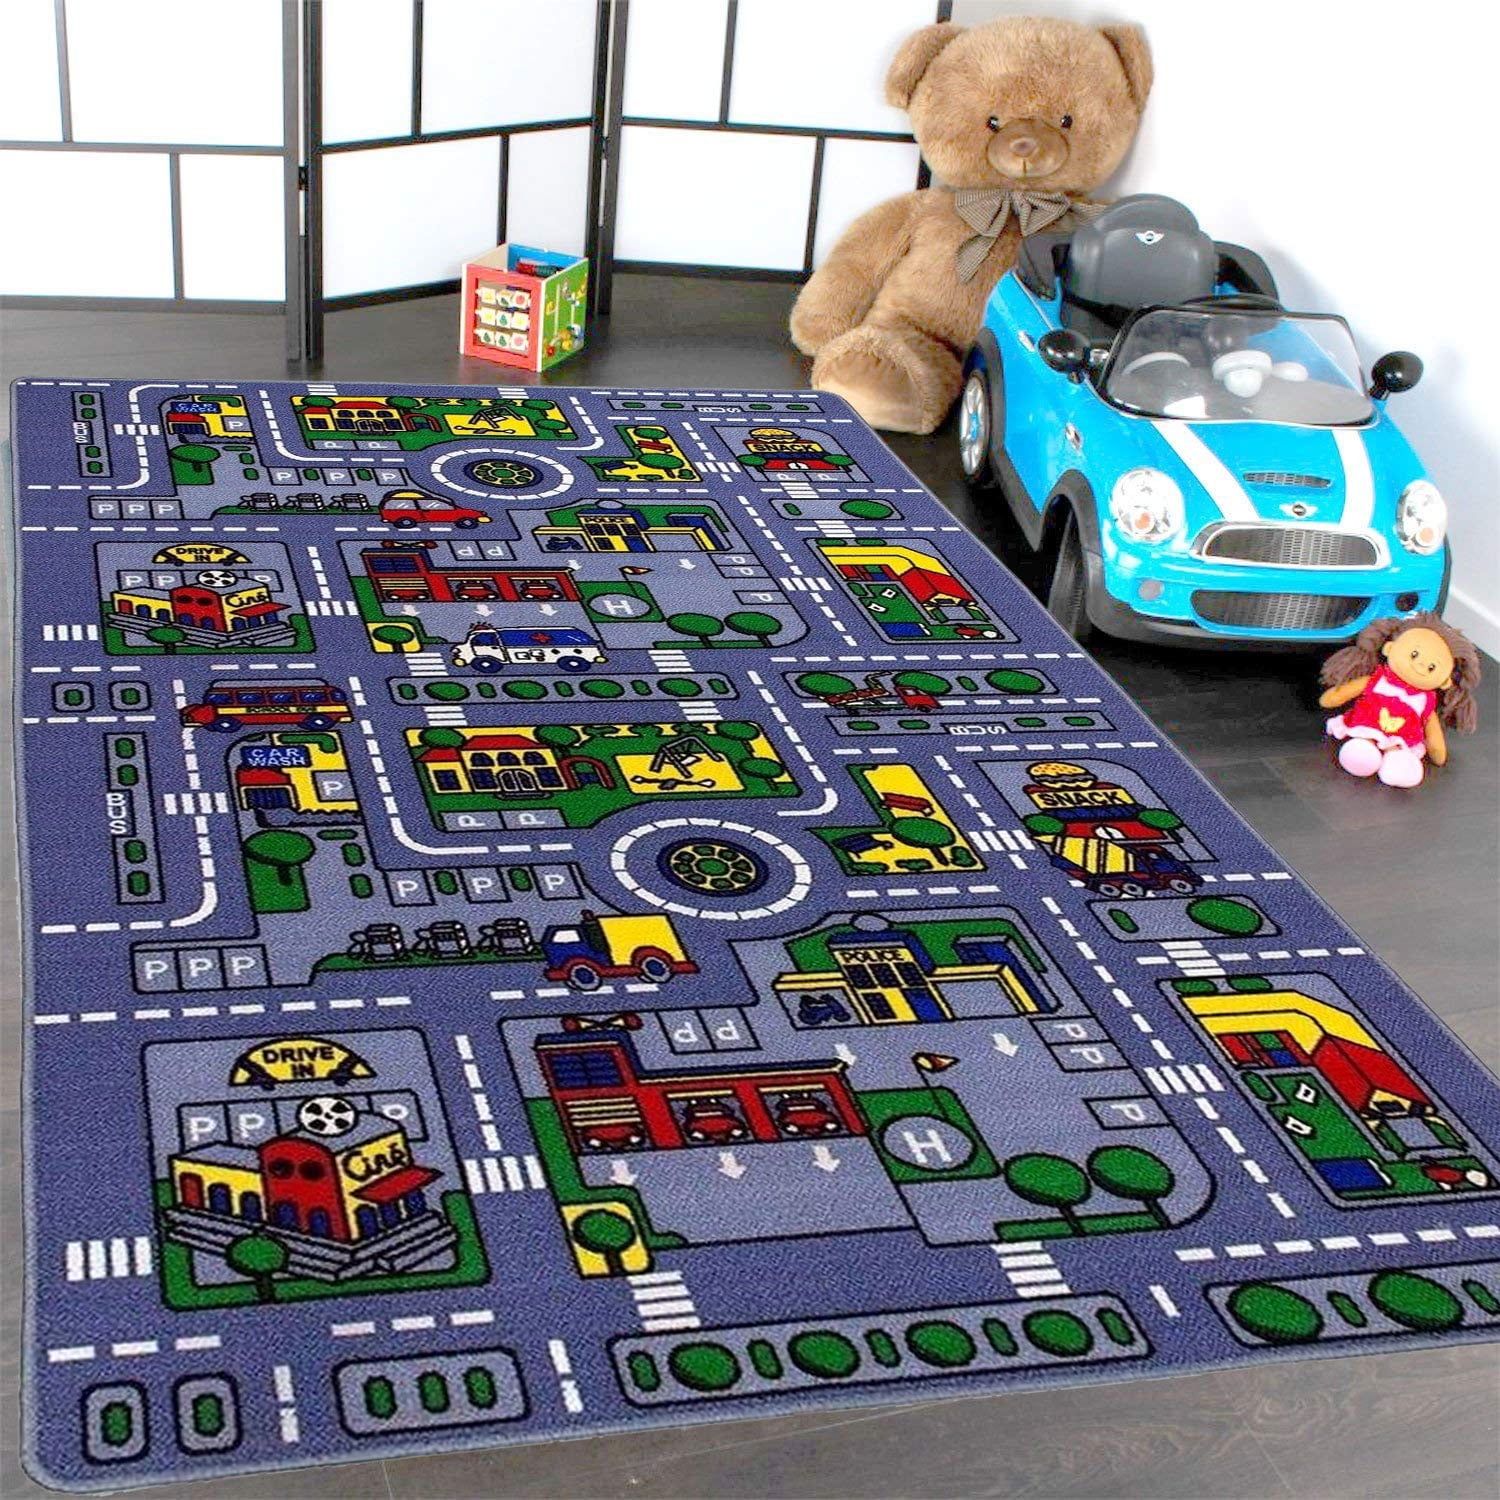 Details about   Disney Police Car BOXED Melissa & Doug Mickey's City Rug Playmat & Taxi Bus 